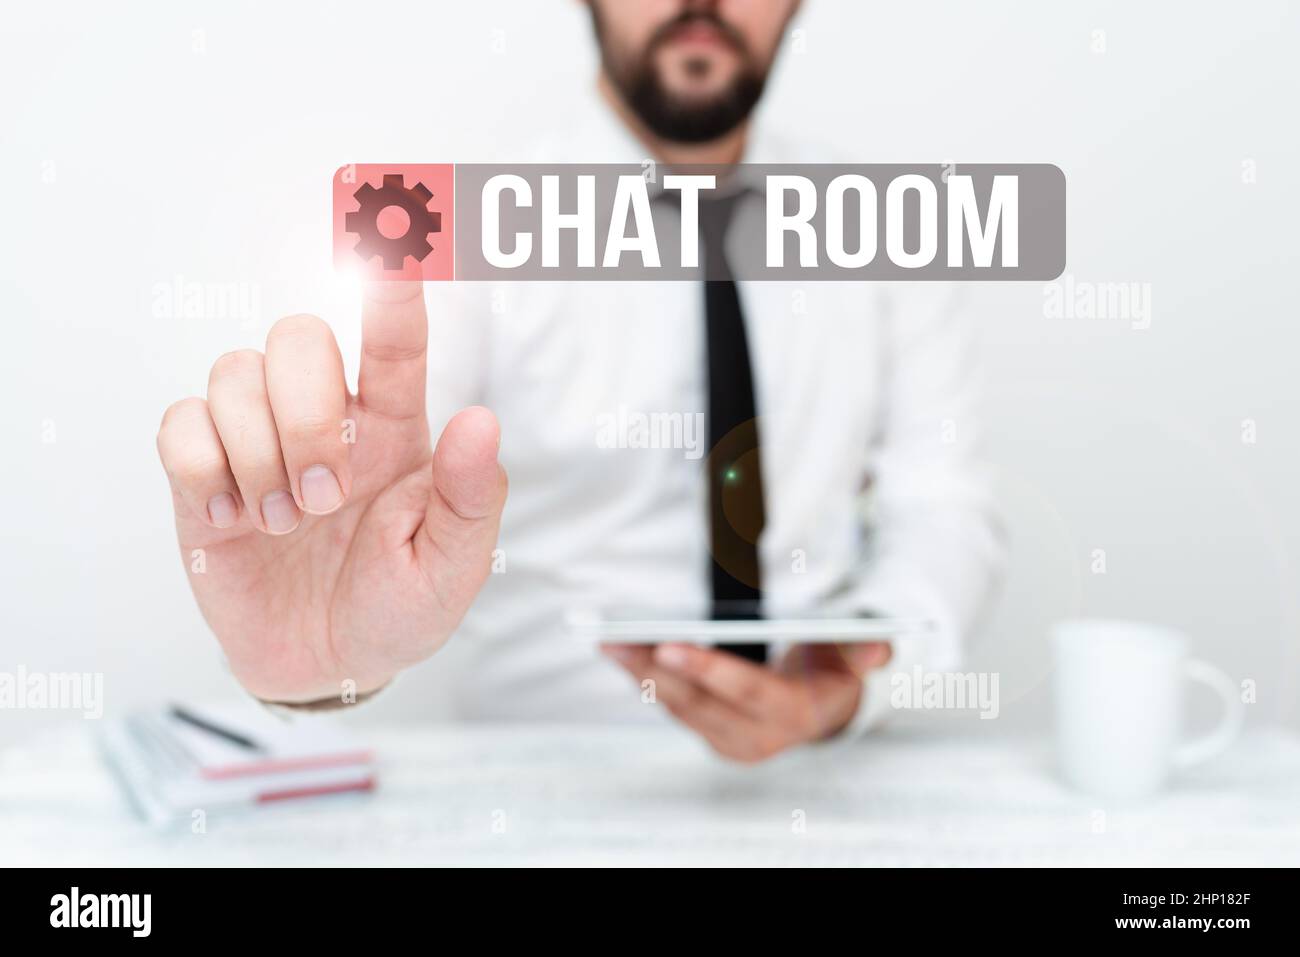 Text caption presenting Chat Room, Business approach area on the Internet or computer network where users communicate Presenting Communication Technol Stock Photo